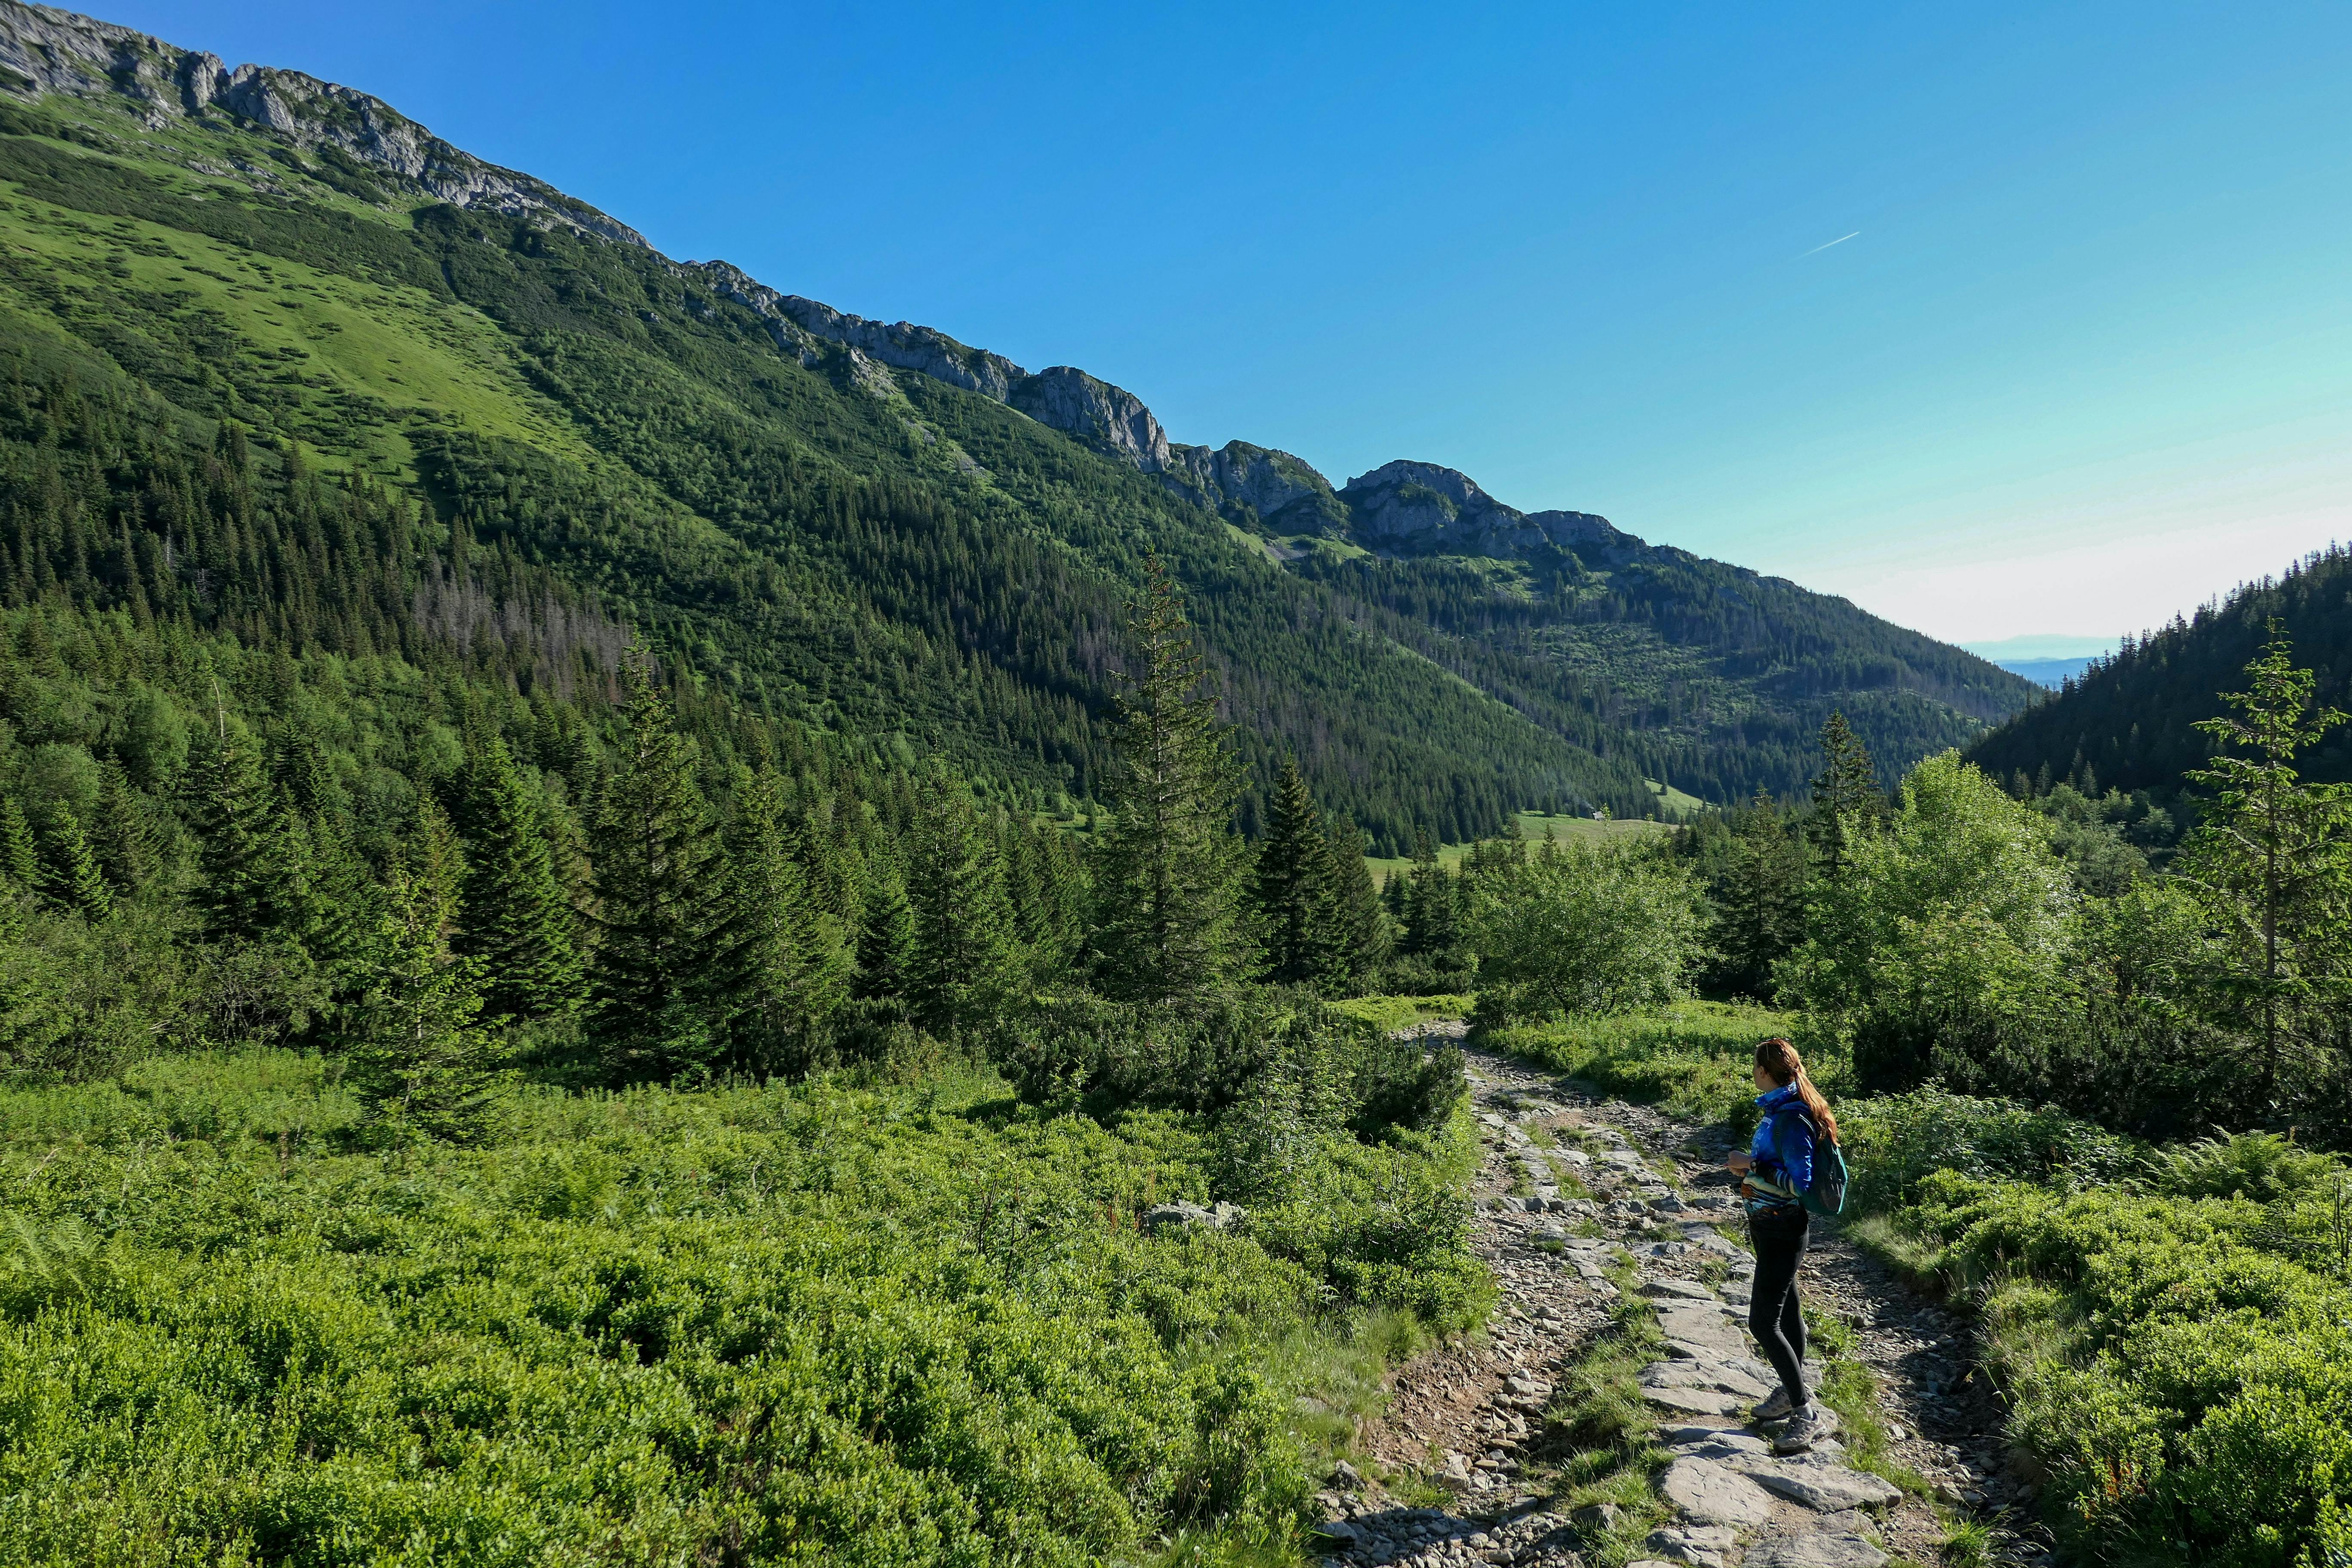 A rocky trail travels down the right side of the photo. The surroundings are green and lush with a bright blue sky behind them.